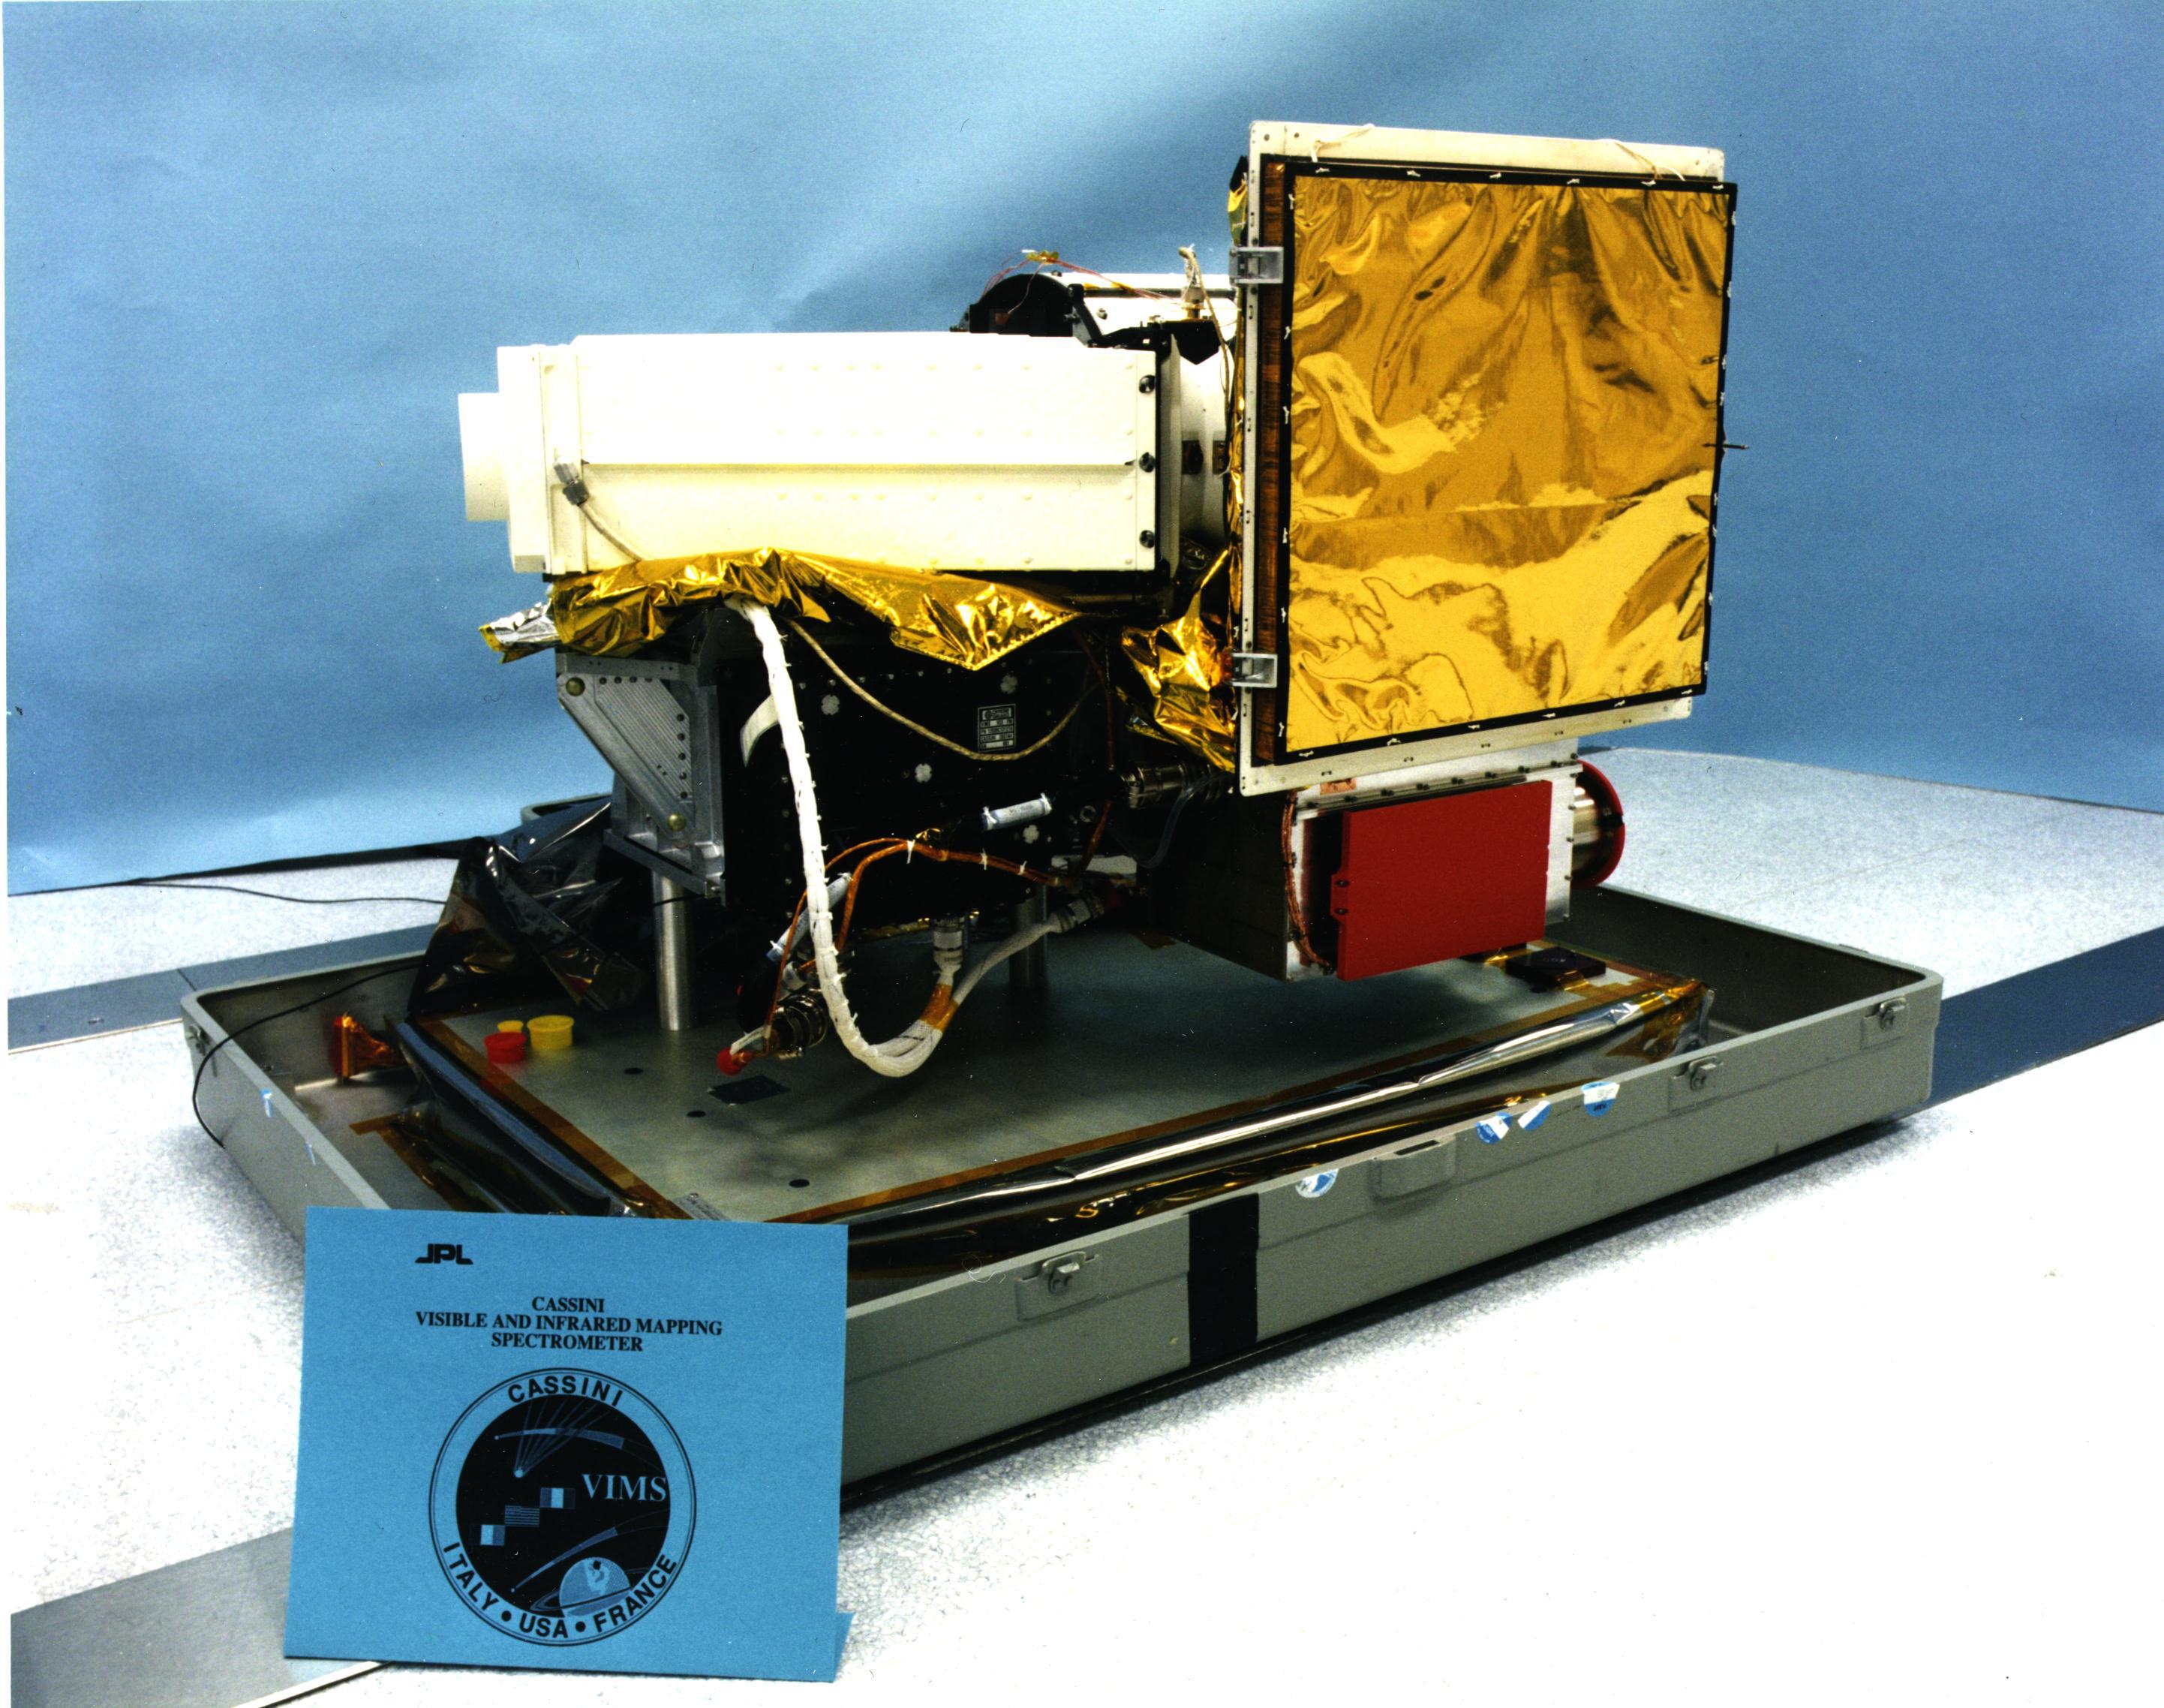 The visual and infrared mapping spectrometer instrument just before it was attached to the Cassini spacecraft.